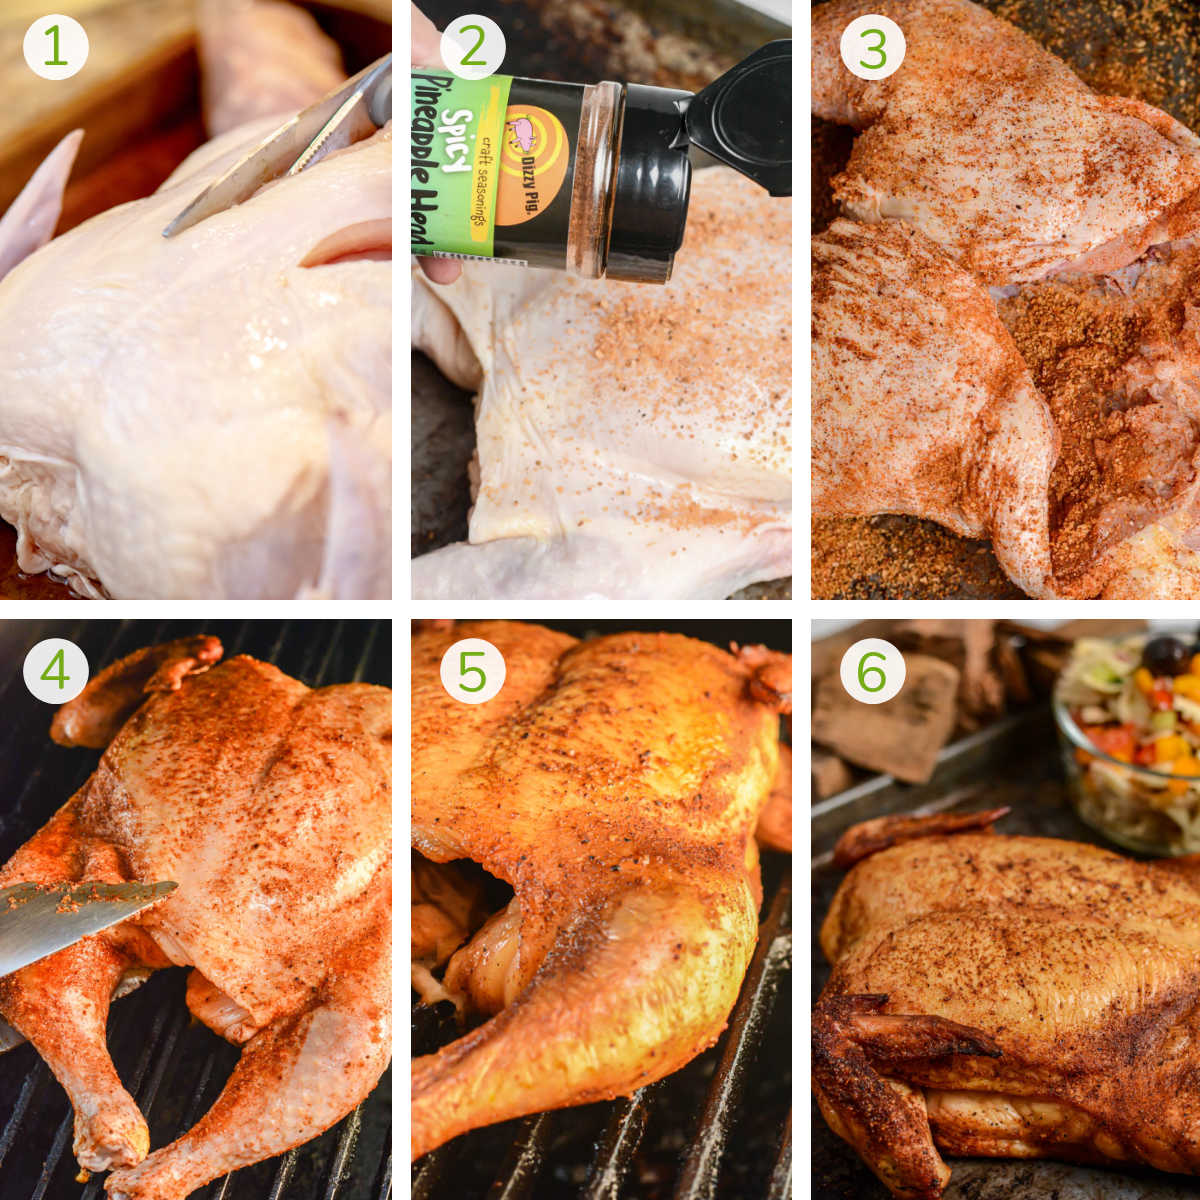 six process photos showing how to spatchcock the chicken, adding seasoning, smoking and then serving the smoked spatchcock chicken.